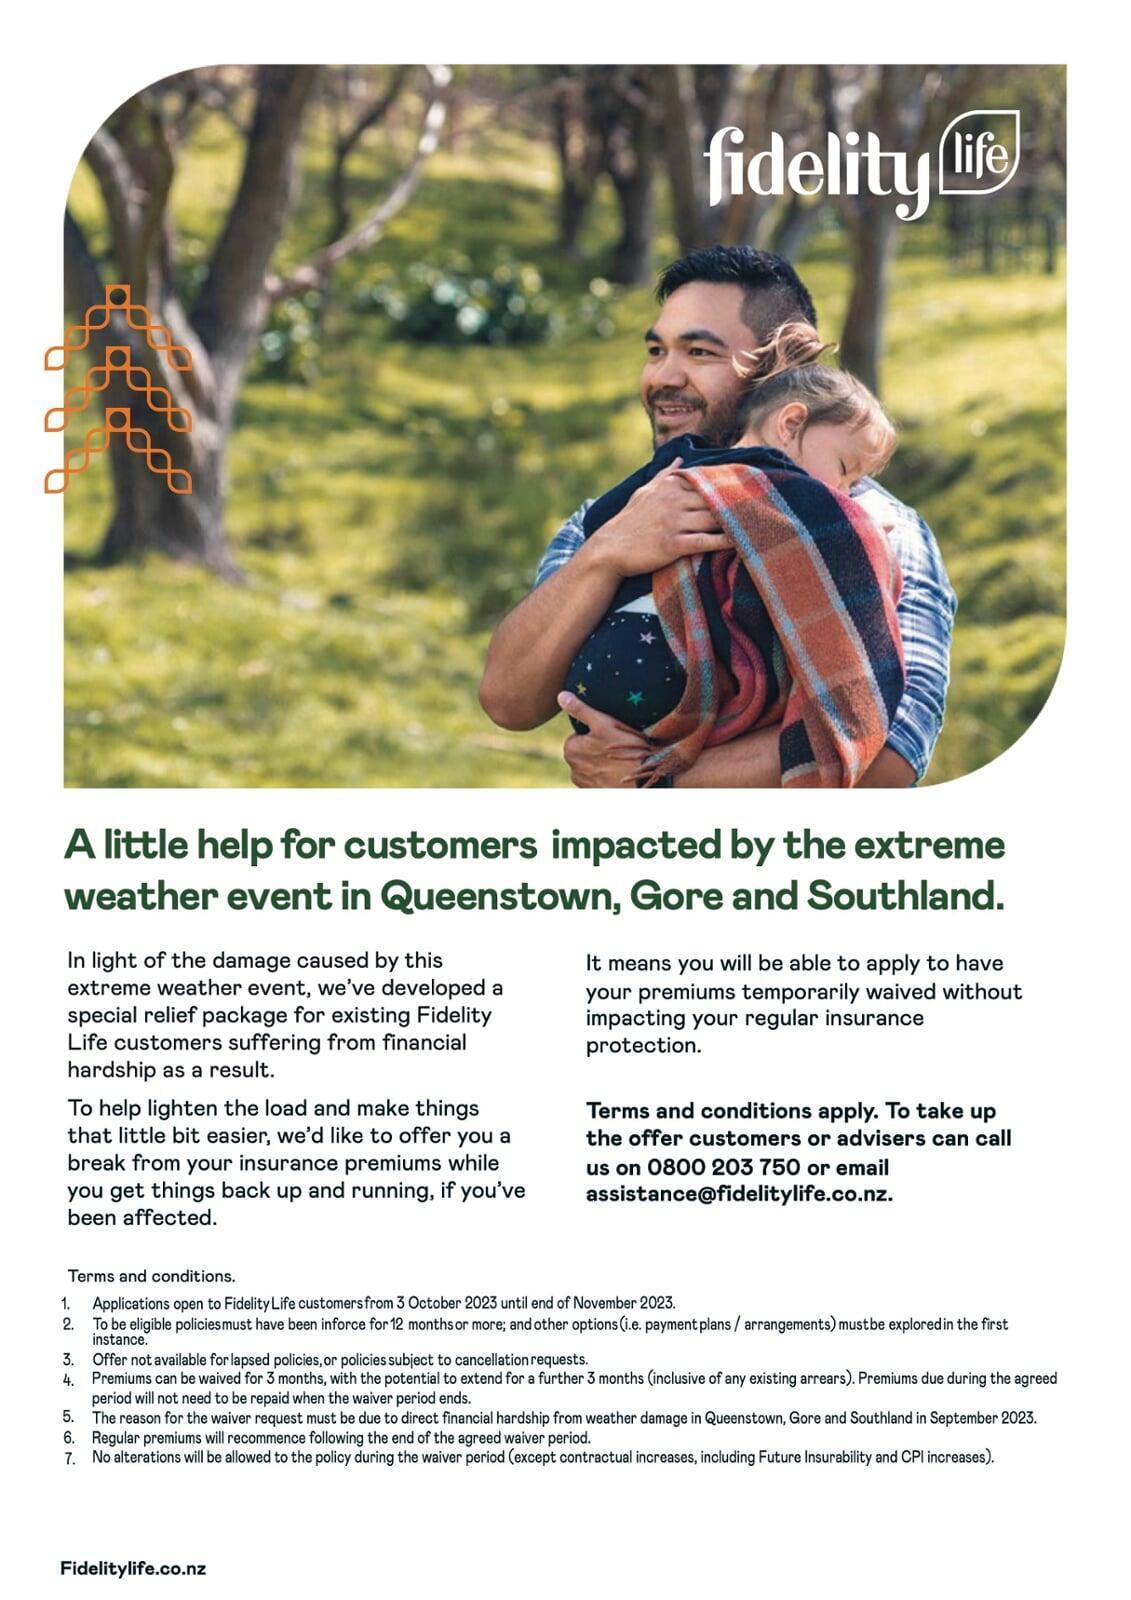 Premium Relief Offer from FIDELITY LIFE for Queenstown, Gore and Southland